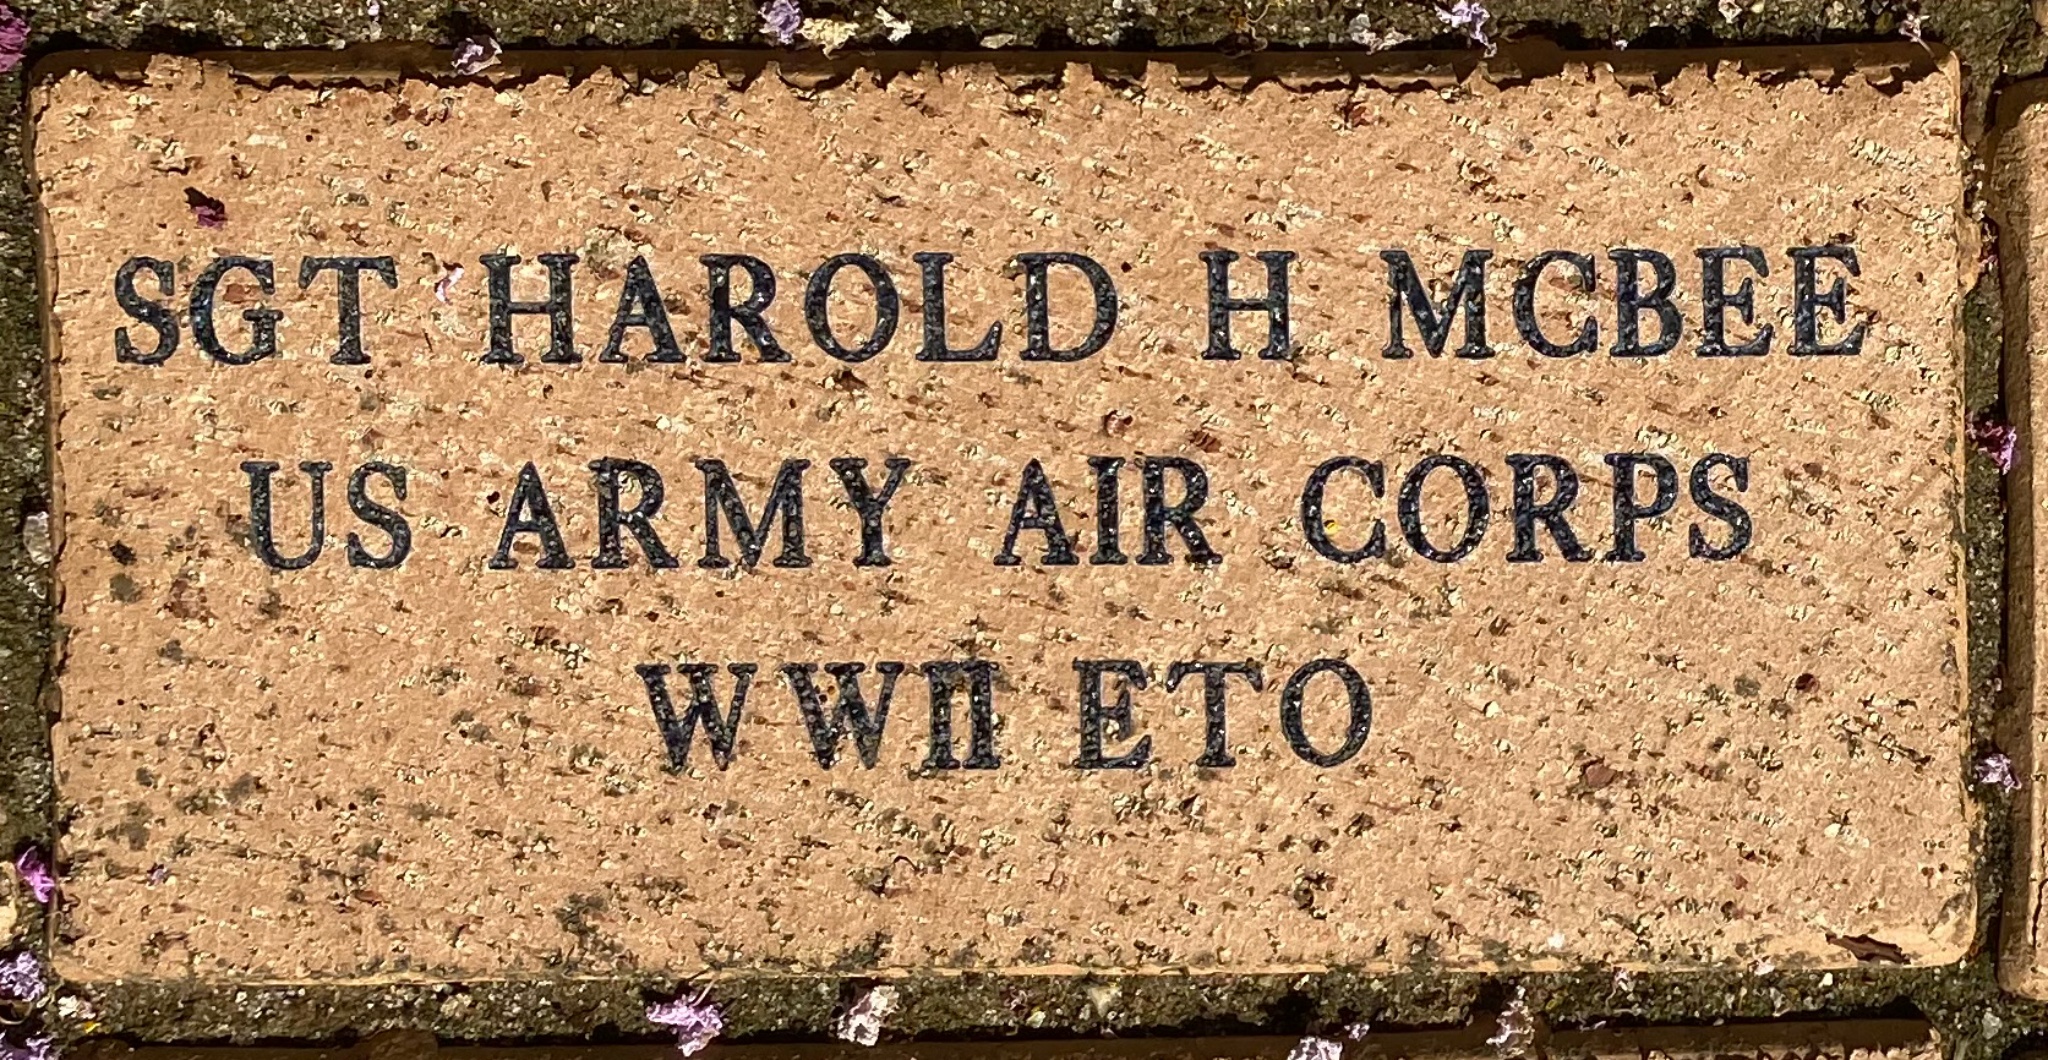 SGT HAROLD H MCBEE US ARMY AIR CORPS WWII ETO